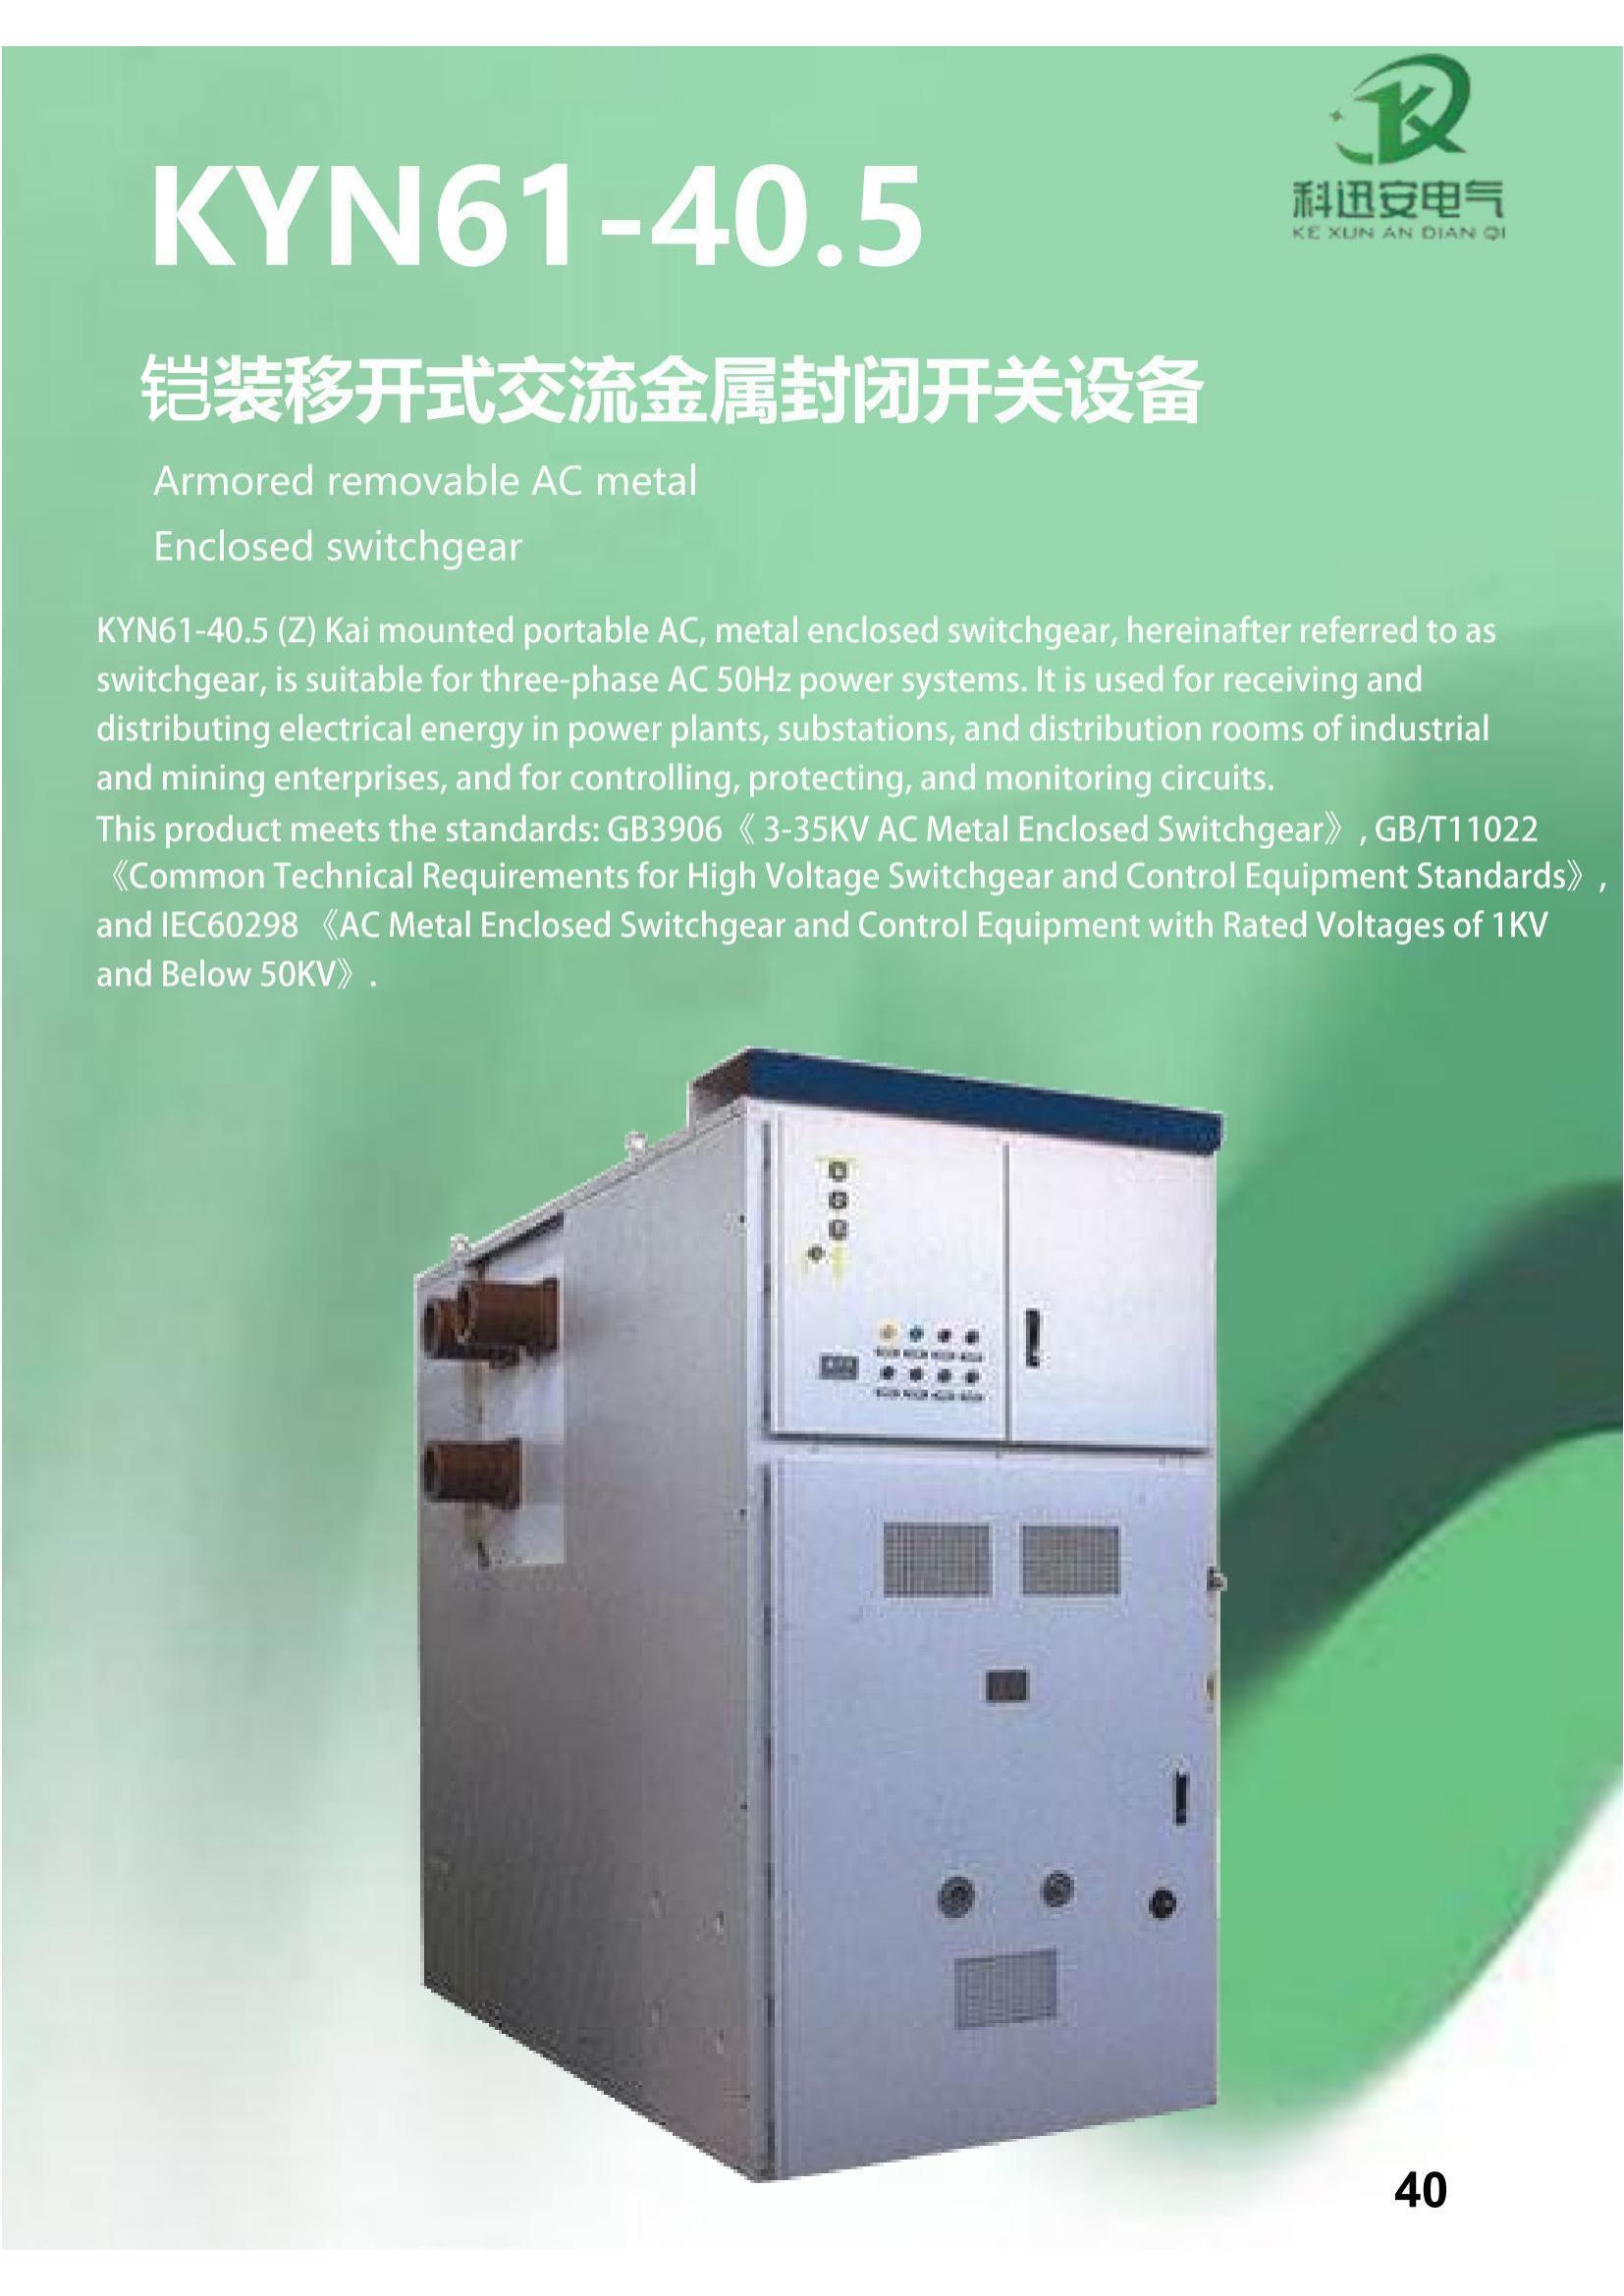 KYN61-40.5 Armored removable AC metal Enclosed switchgear